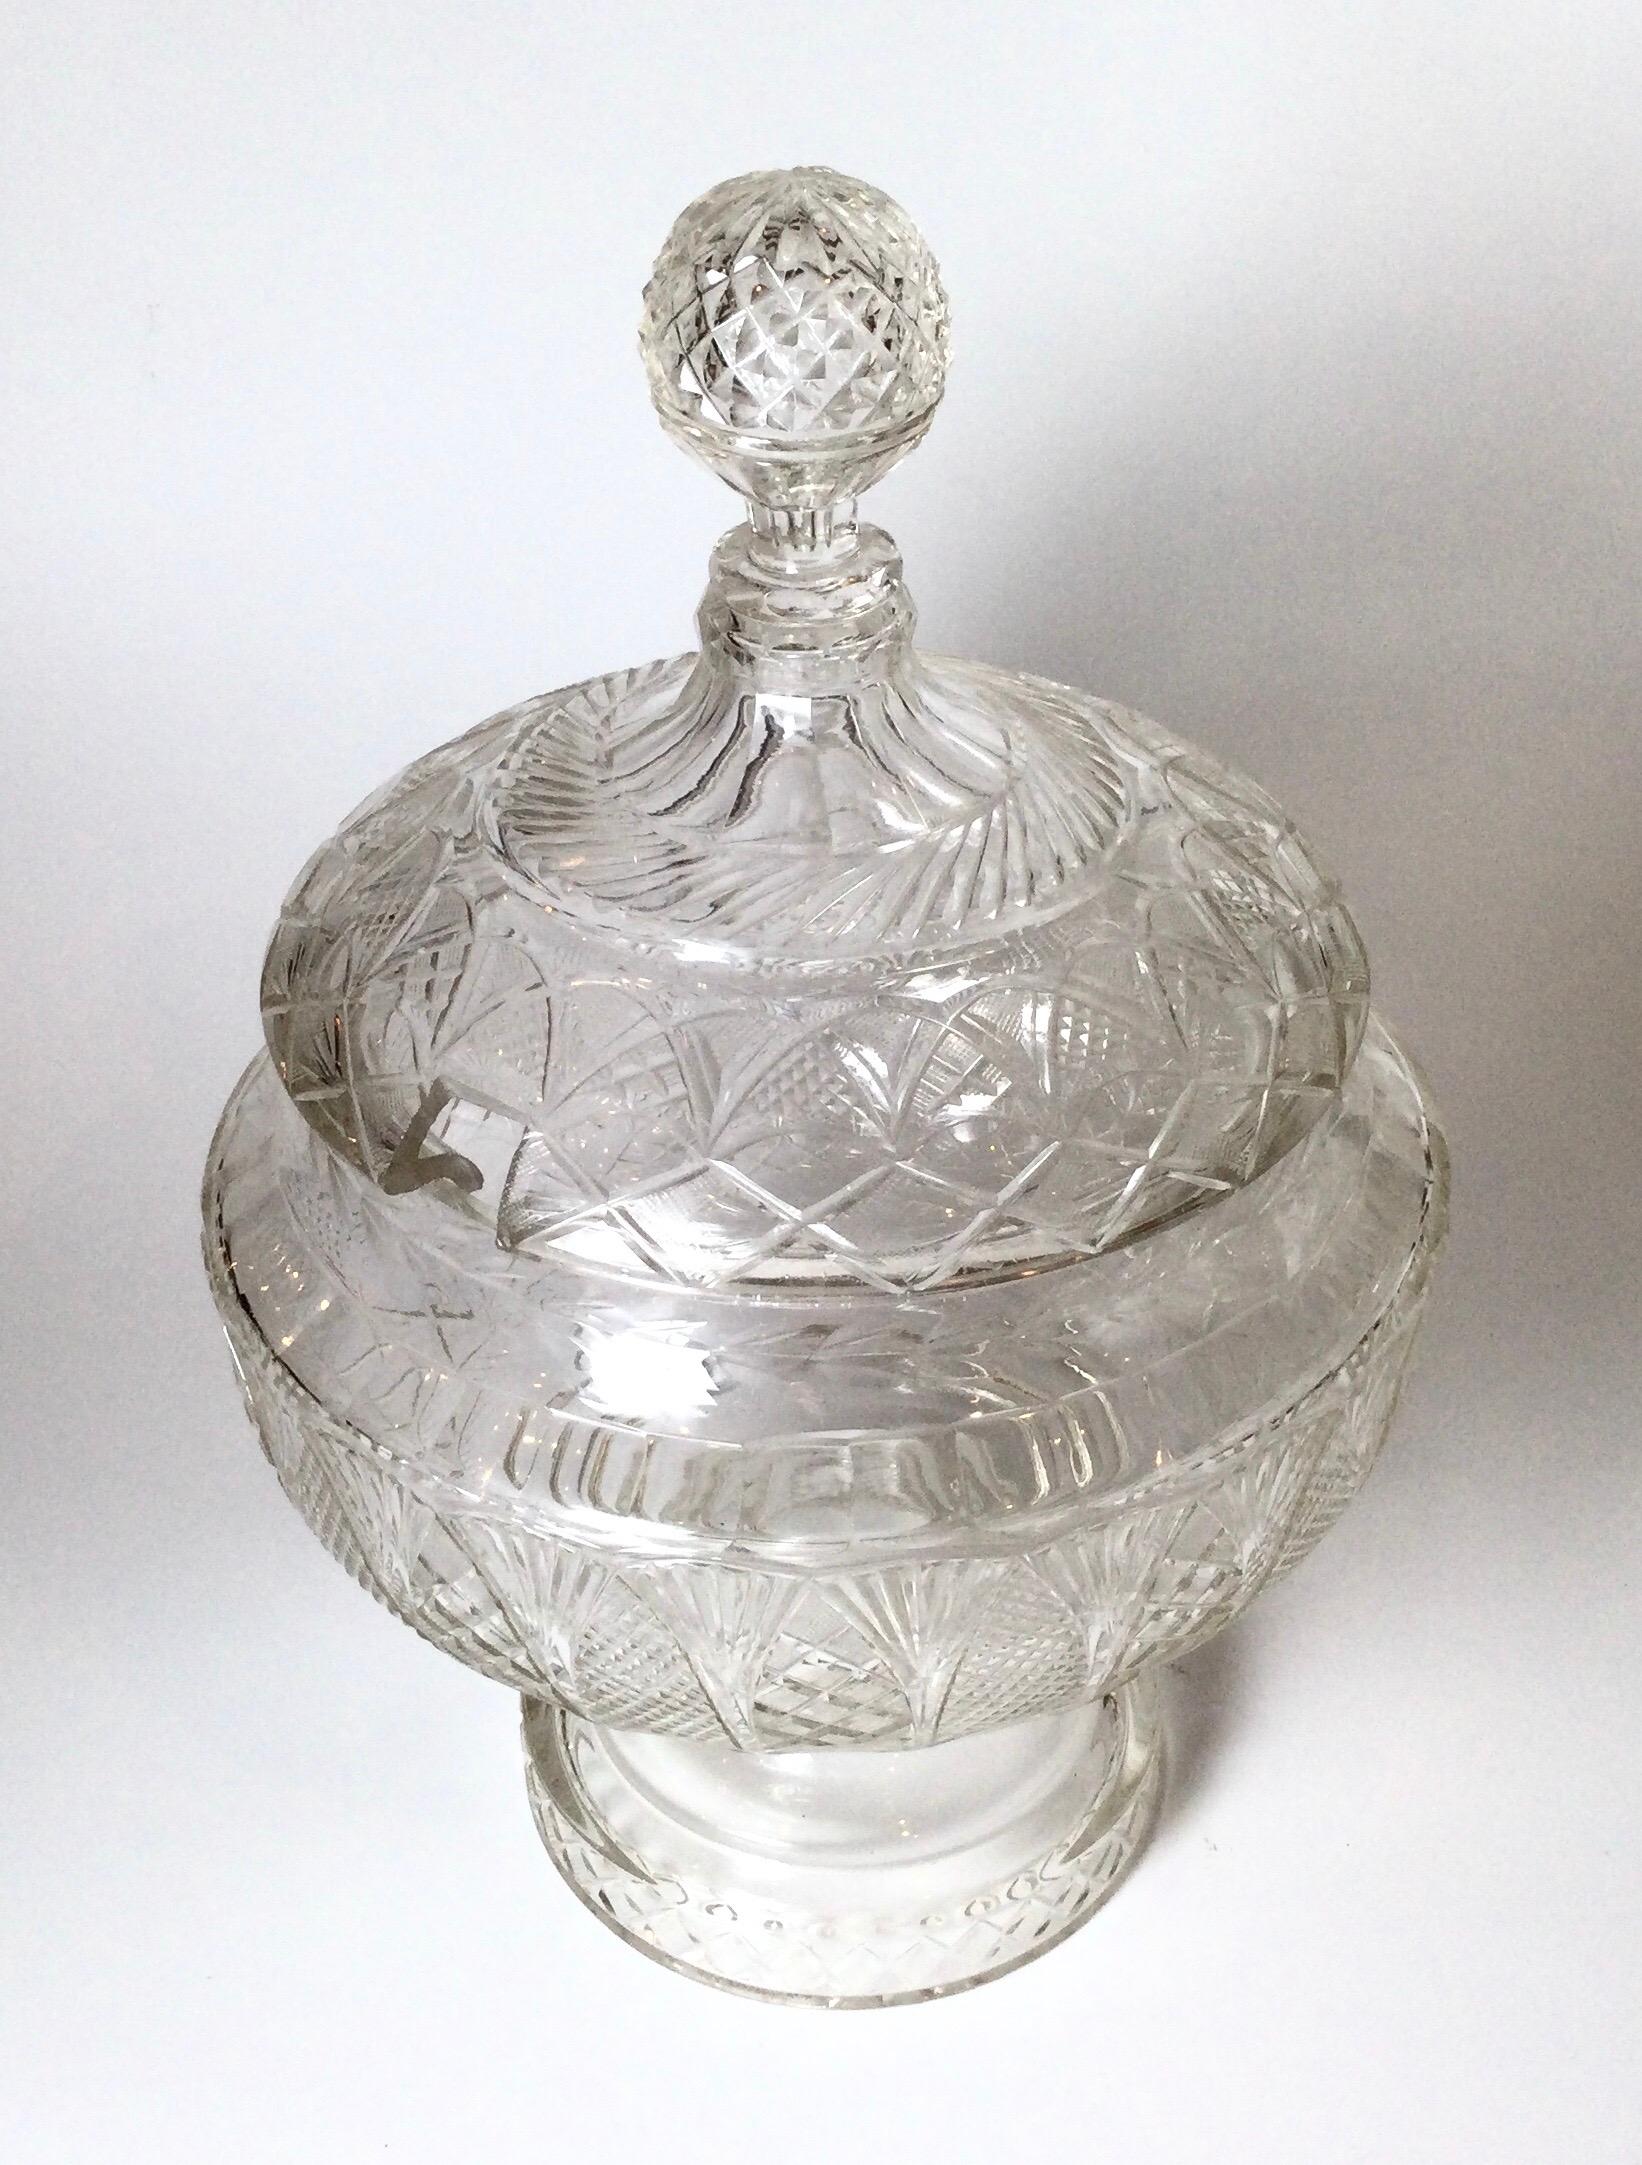 Extraordinary large cut glass punch bowl centerpiece on pedestal base with lid. The lid with diamond cut ball finial rests on a shapely detailed cut glass bowl with round pedestal base, this is all hand cut glass on a cutting wheel and not pressed,